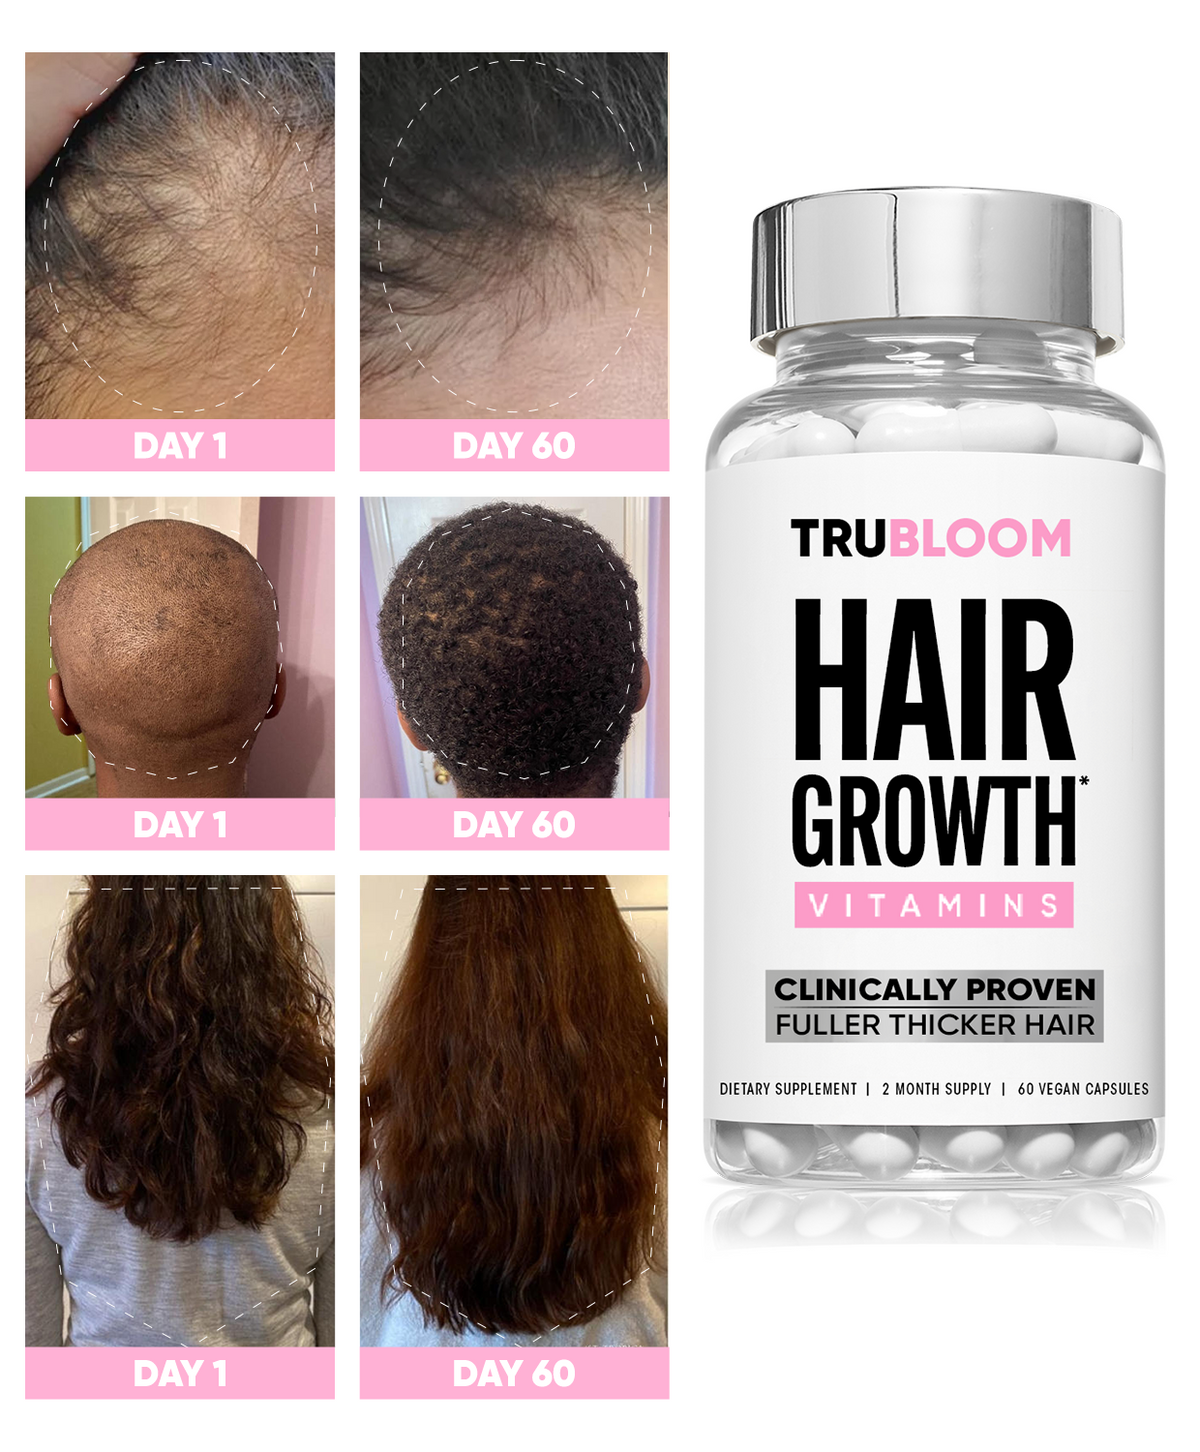 ST. TROPICA Hair Growth Vitamins - 60 Day Hair Challenge (2 Month Supply)